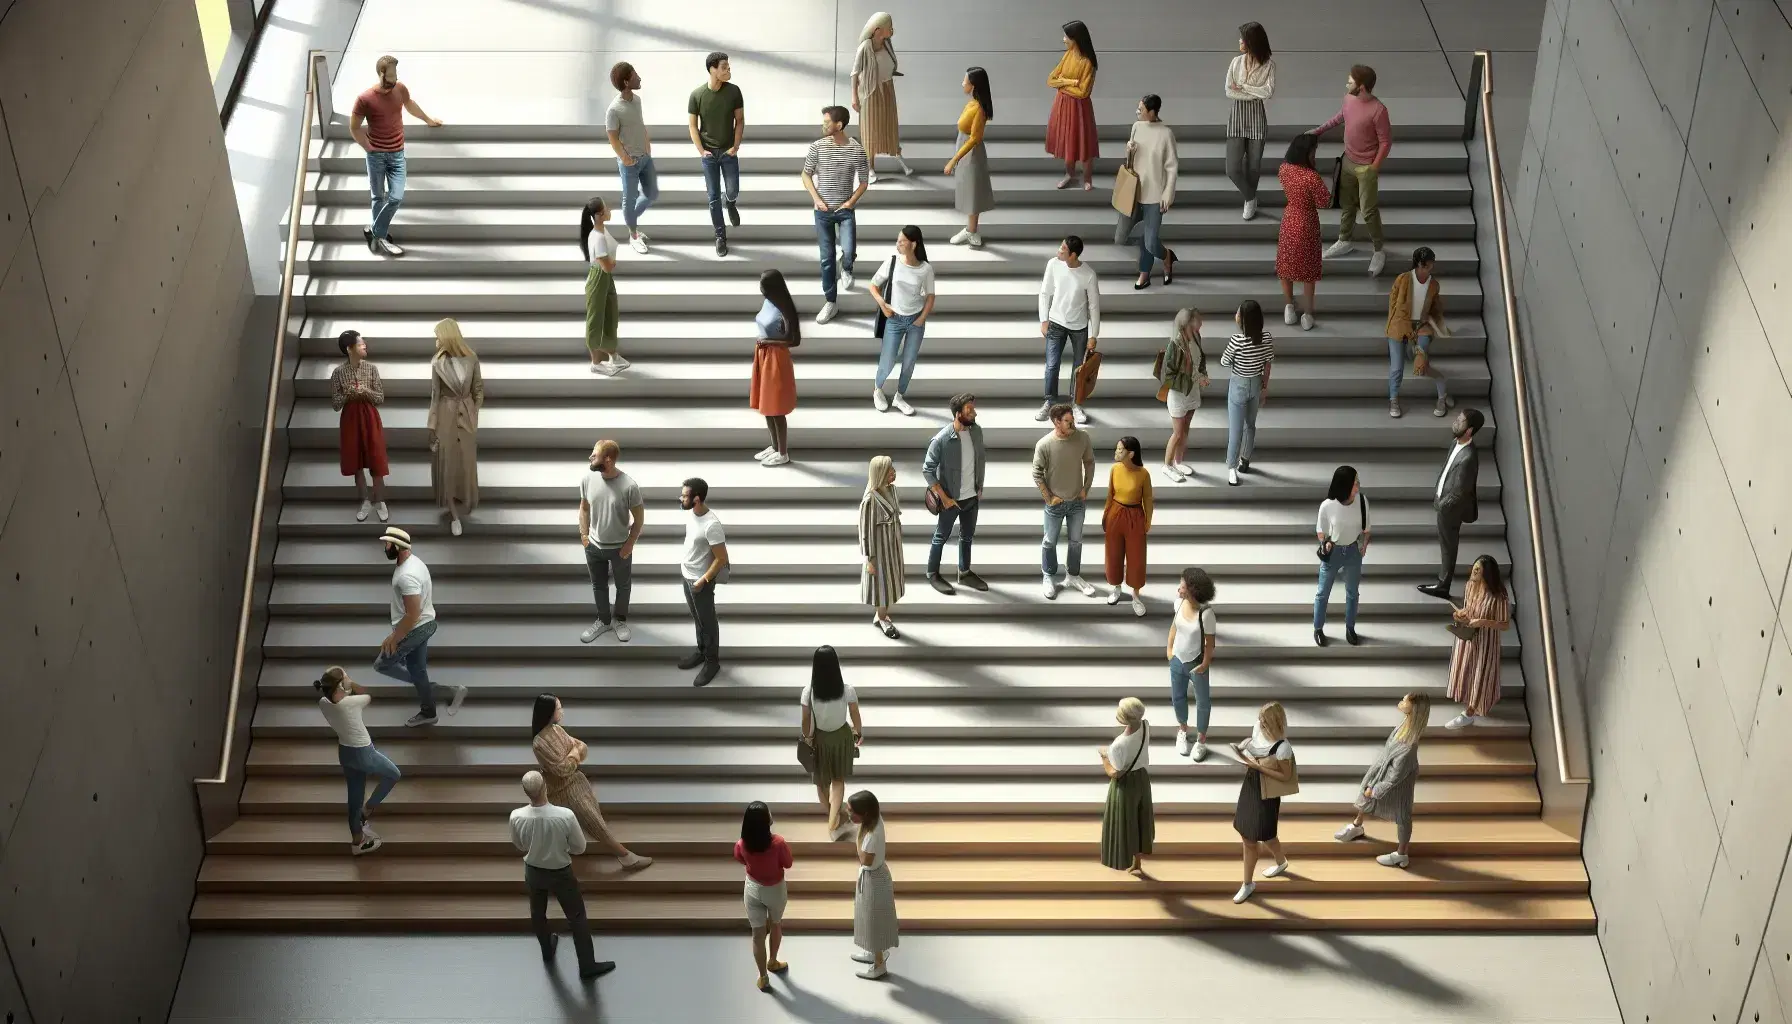 Diverse group of people of different ages and ethnicities on a diagonal staircase, some in formal clothes, others in casual, in bright environment.